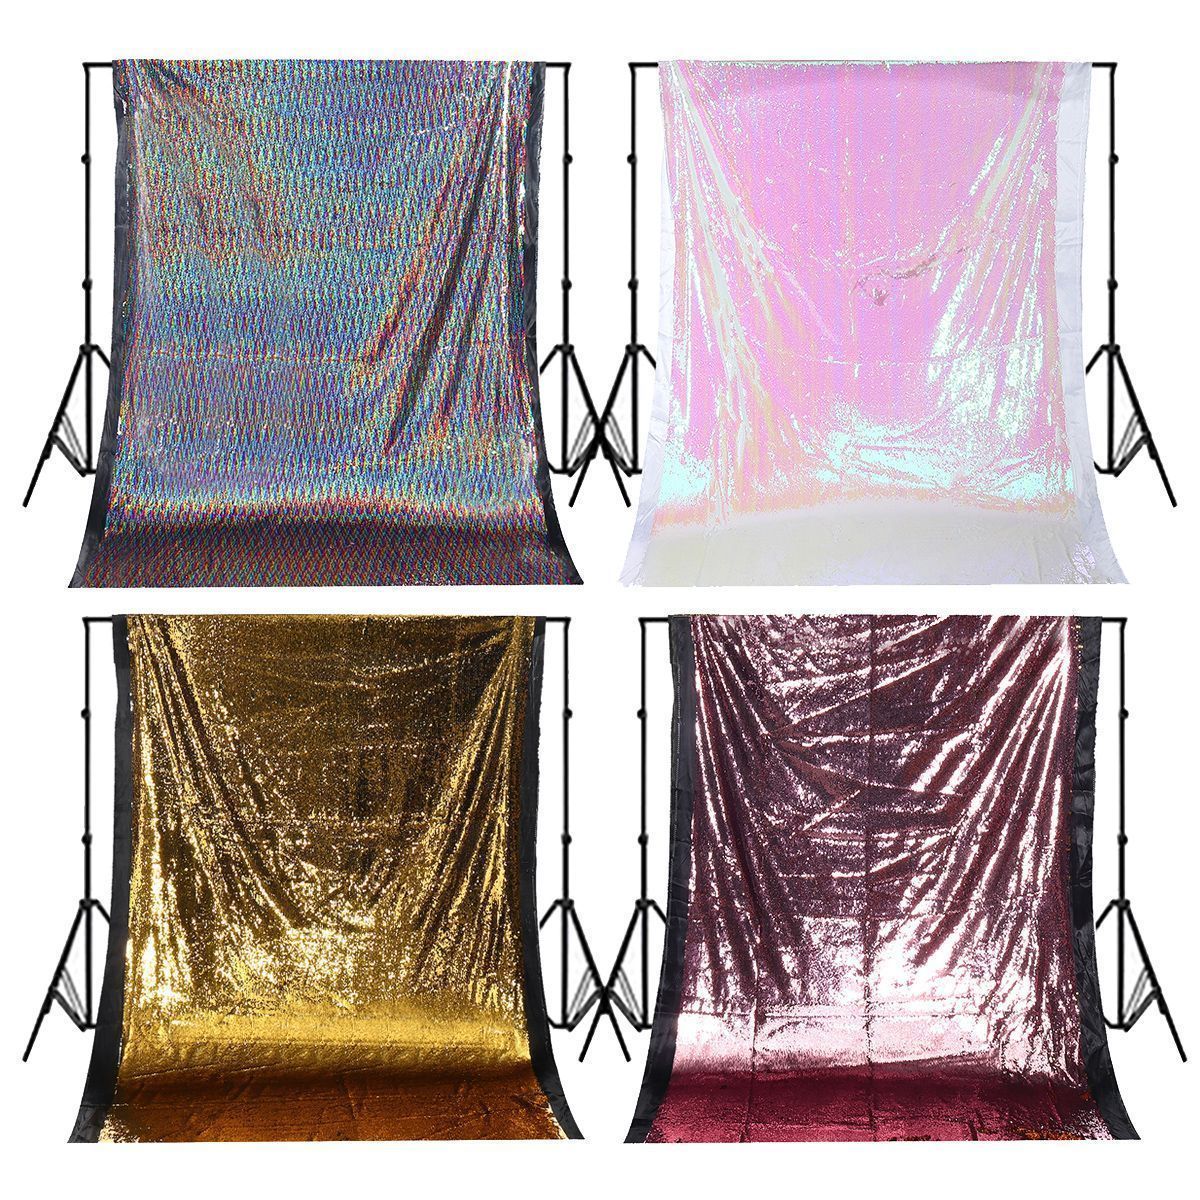 13x19m-Glitter-Sequin-Fabric-Photography-Backdrop-Curtain-Wedding-Party-Decor-1627473